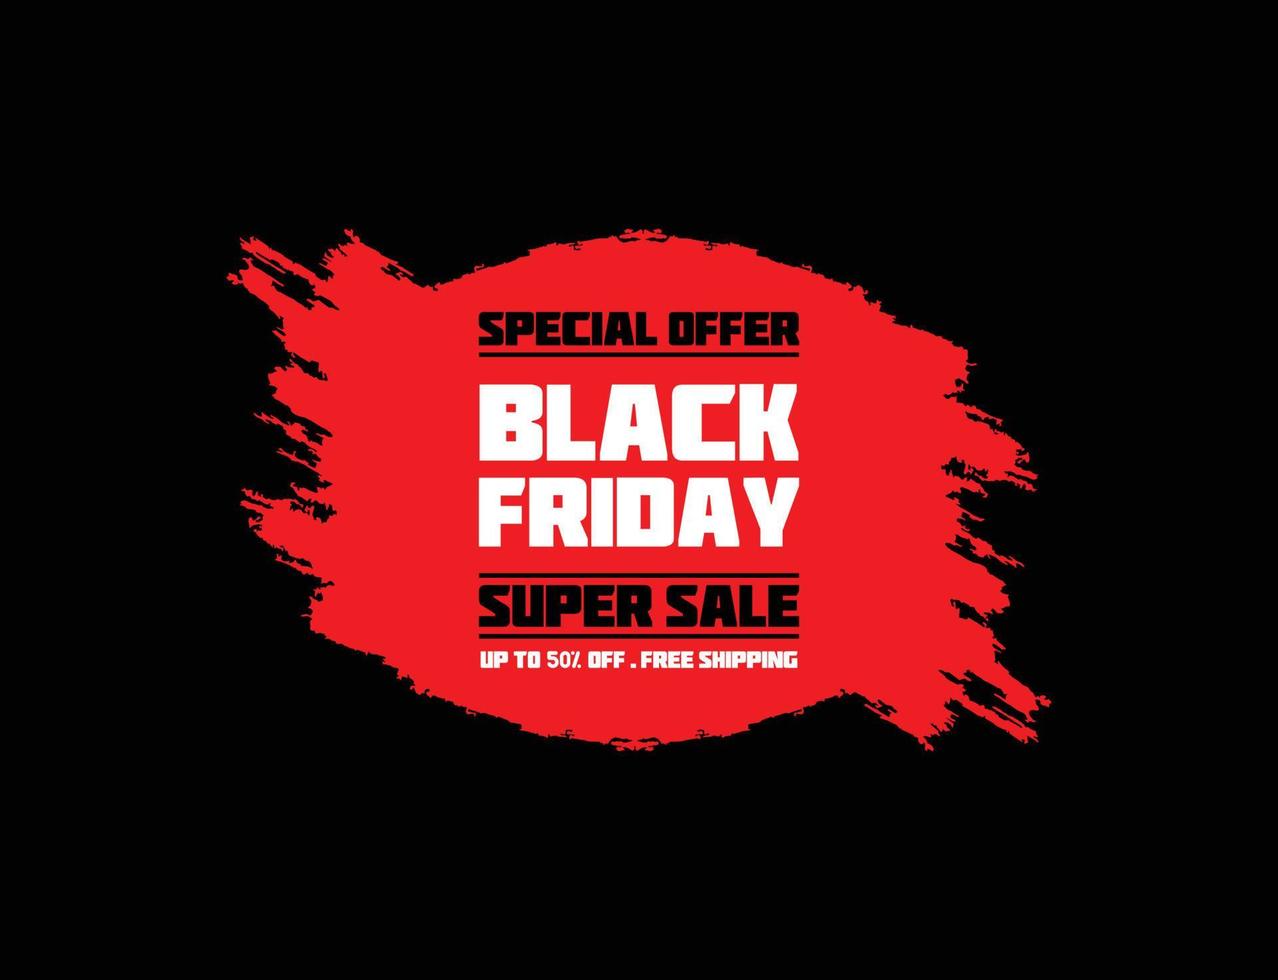 Black Friday sale promotional marketing banner, poster with red tags. Vector illustration